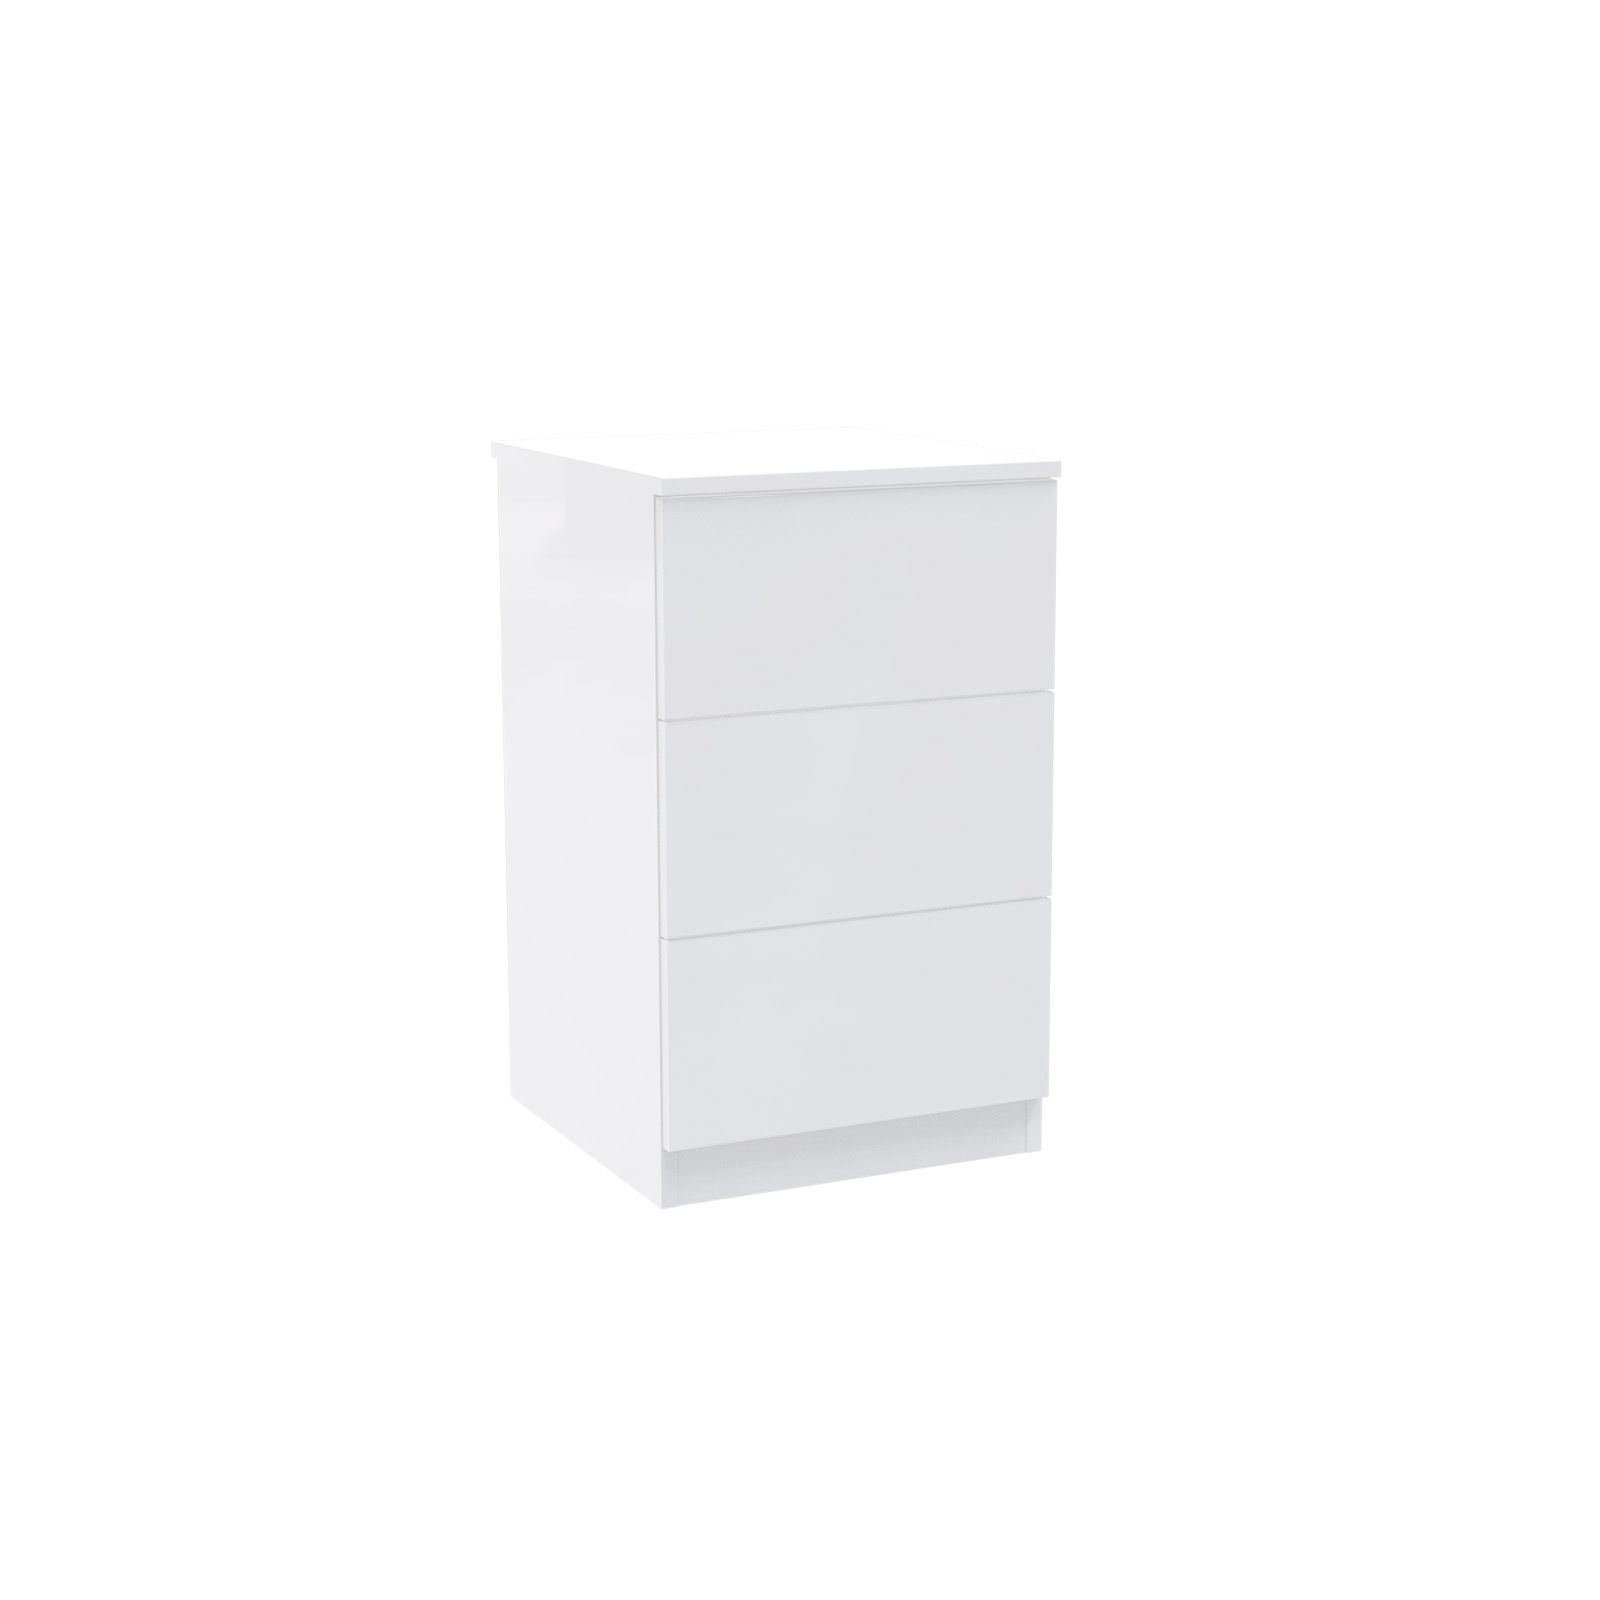 House Beautiful Honest Narrow Chest of Drawers - Gloss White Slab (W)450mm x (H)756mm